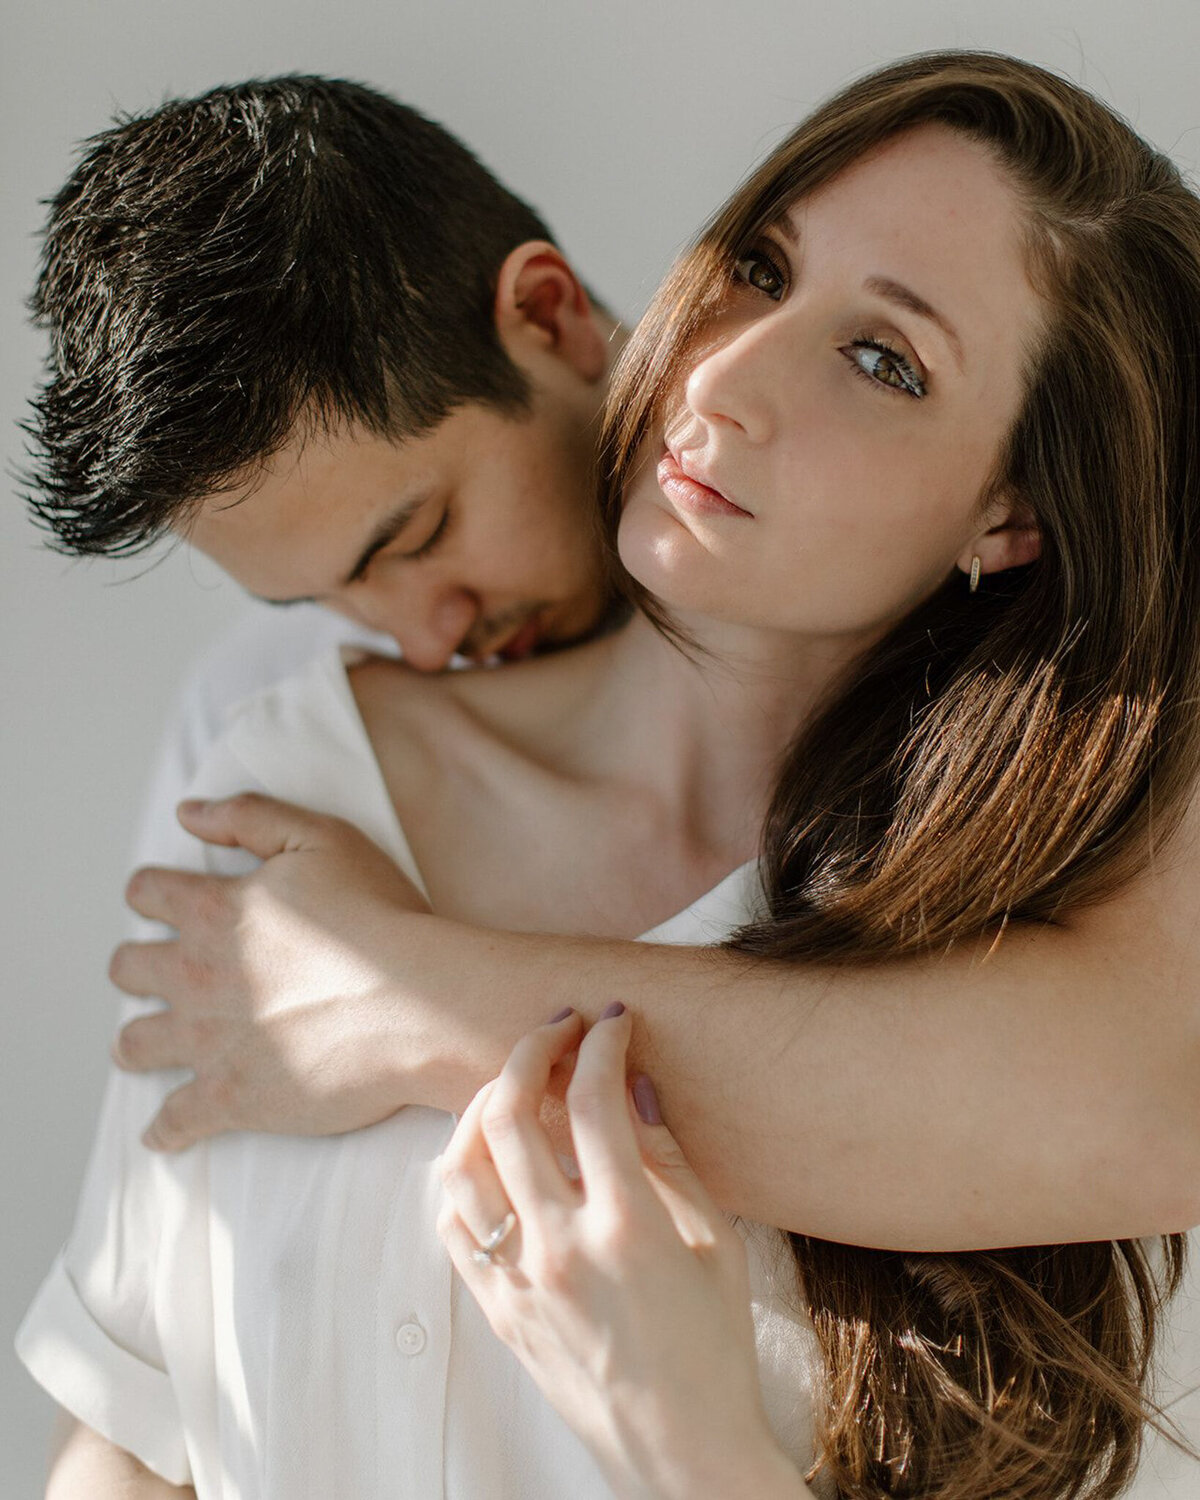 Gorgeous and minimalistic engagement photo inspiration by Bronte Taylor Photography, is a Vancouver-based photographer with a playful, genuine and intimate approach.